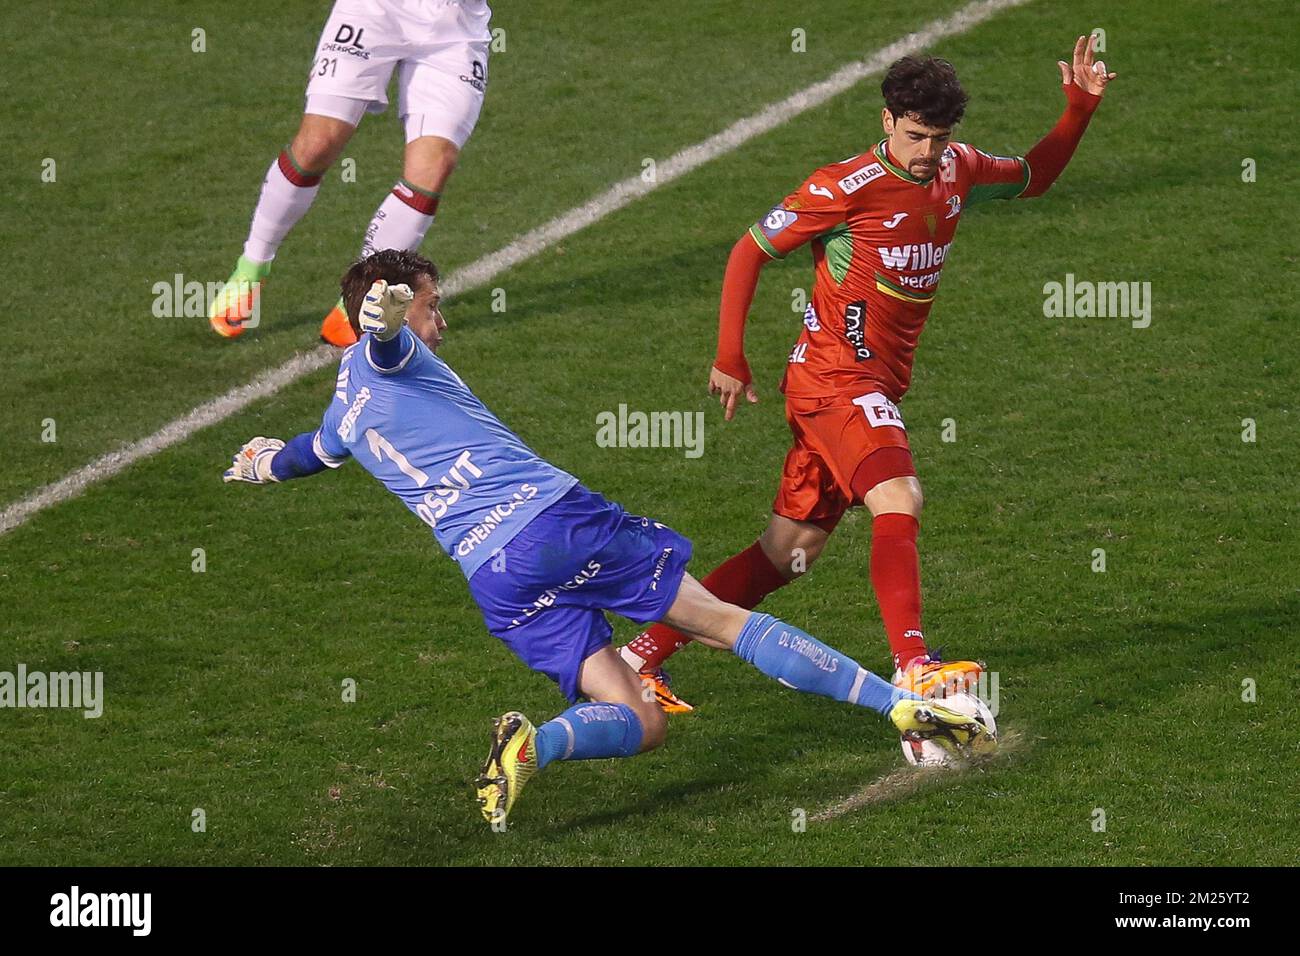 Essevee's goalkeeper Sammy Bossut and Oostende's Fernando Canesin fight for the ball during Croky Cup soccer final between SV Zulte Waregem and KV Oostende, on Saturday 18 March 2017, in Brussels. BELGA PHOTO BRUNO FAHY Stock Photo